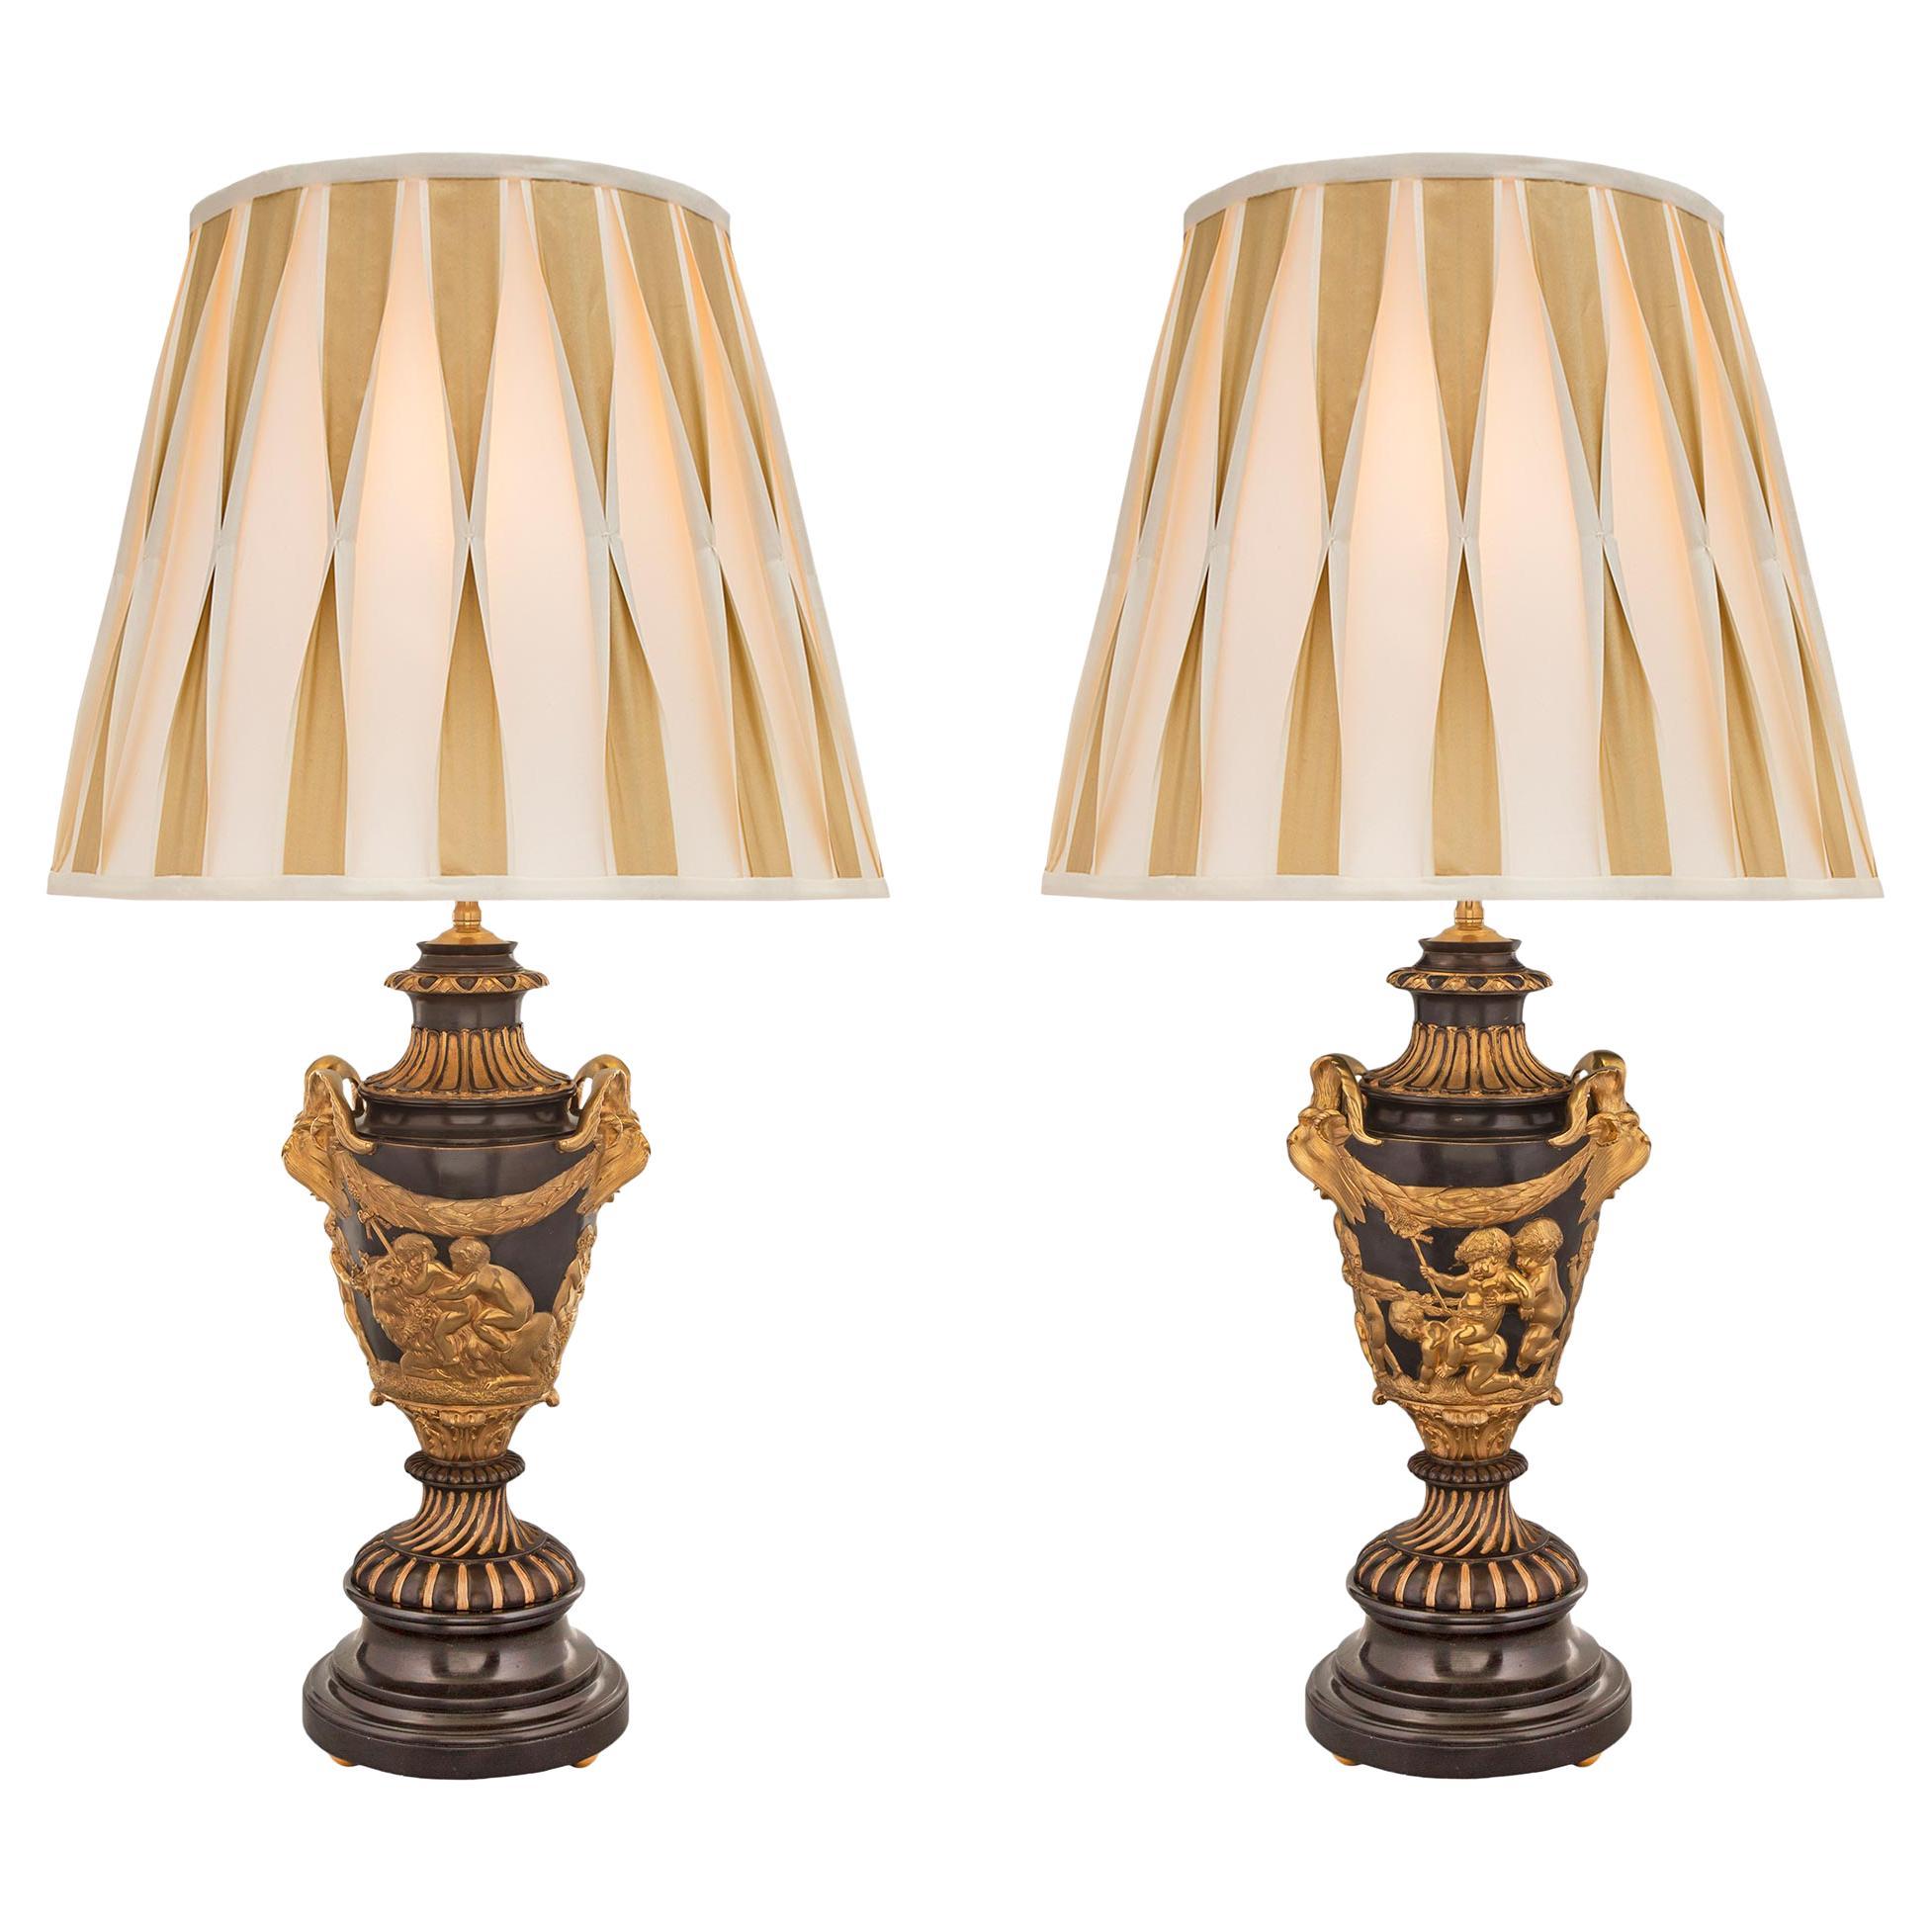 Pair of French 19th Century Neoclassical Lamps in the Manner of Clodion